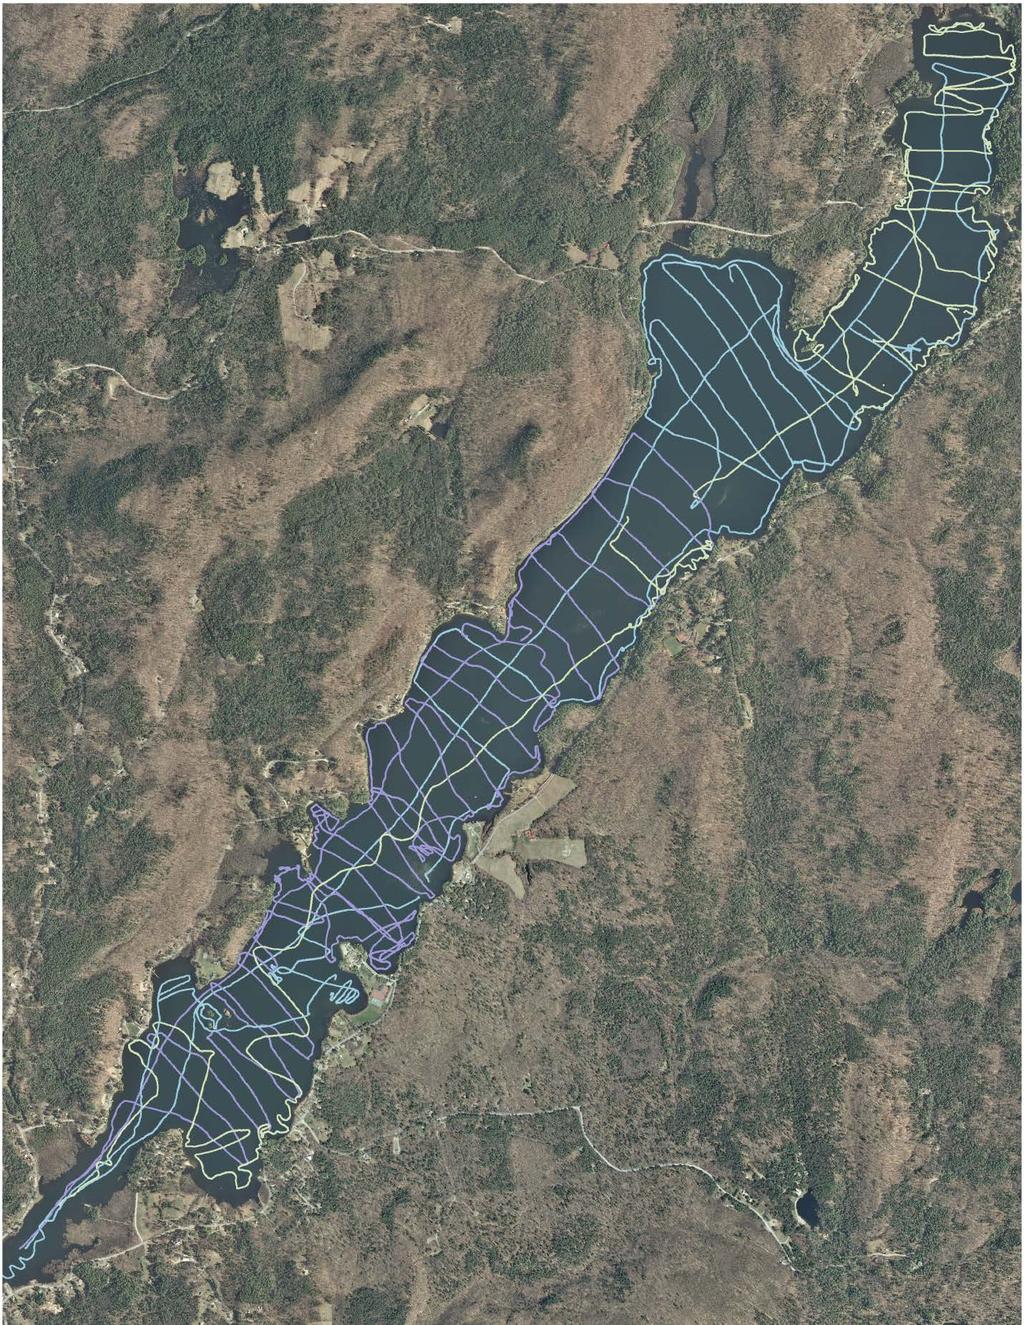 Figure 2. Survey route driven during August 2015 hydroacoustic survey of Brant Lake, NY.